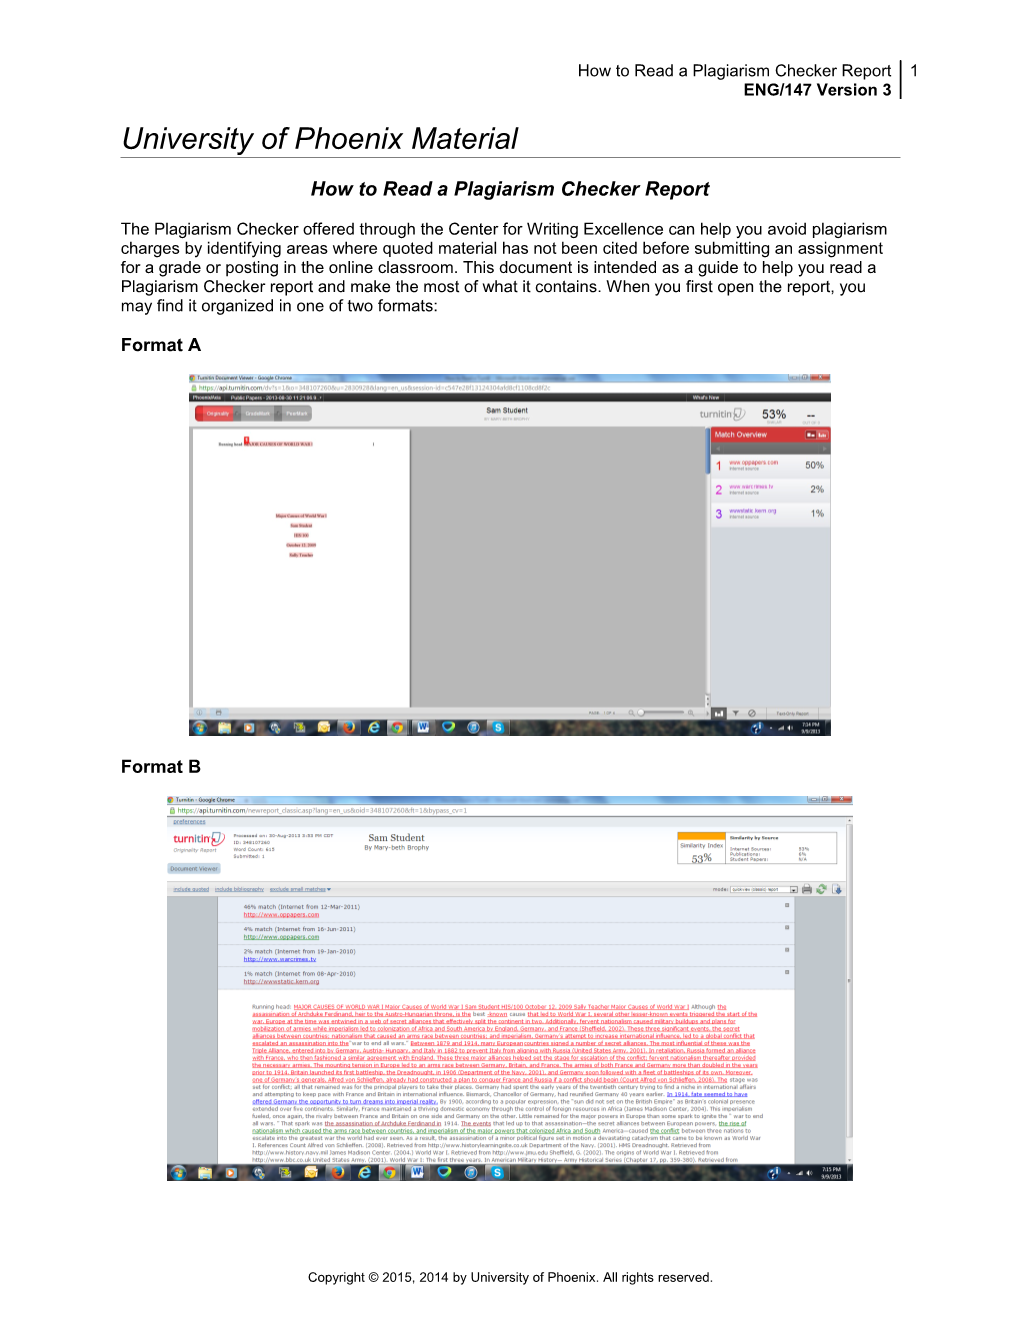 How to Read a Plagiarism Checkerreport